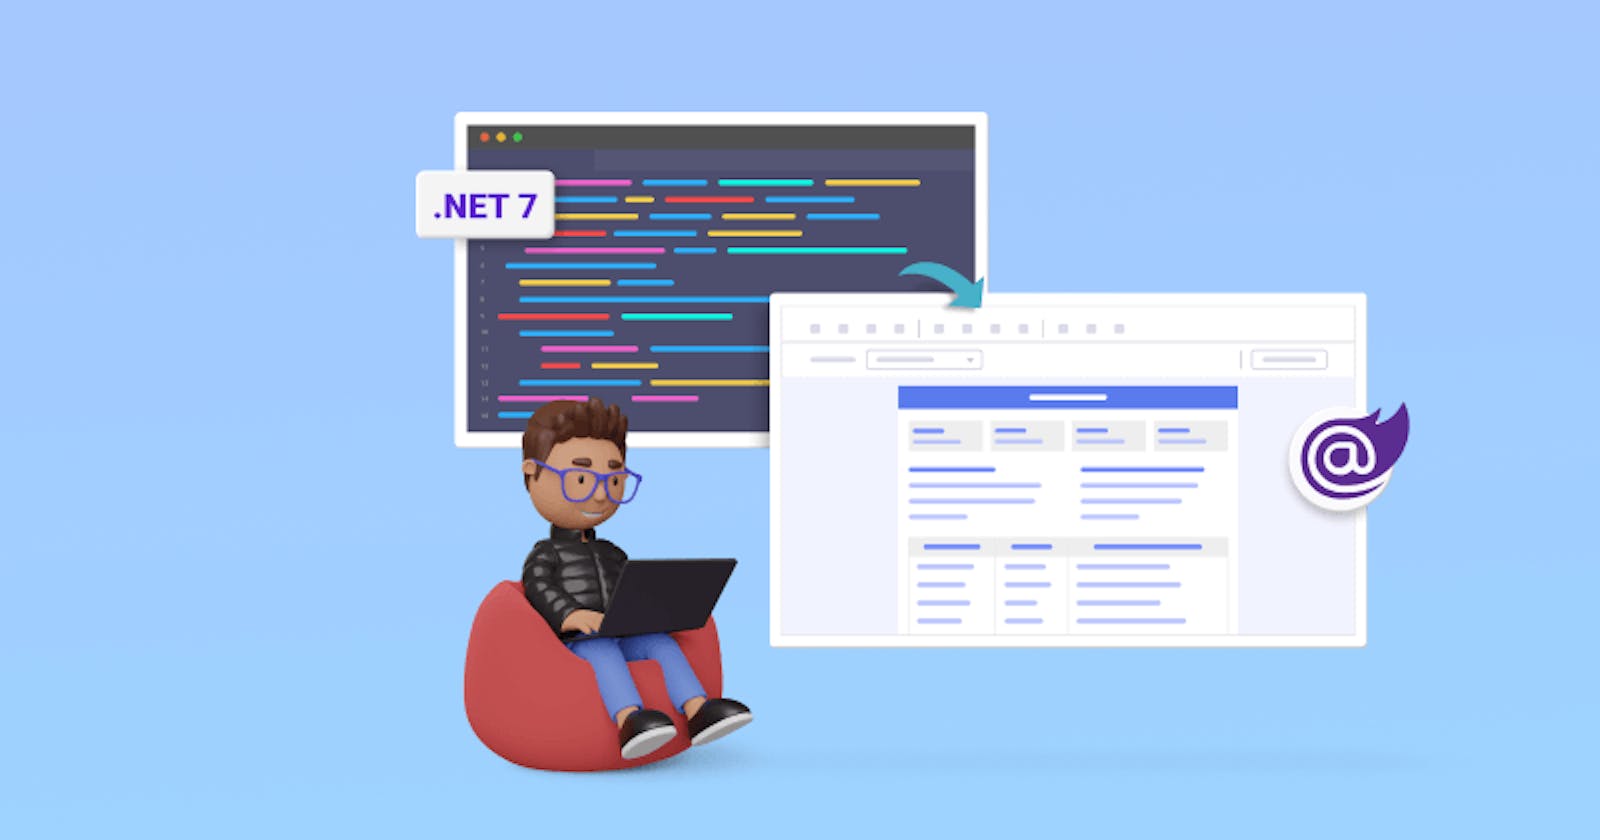 Integrating the Report Viewer into the .NET 7 Blazor Server Application